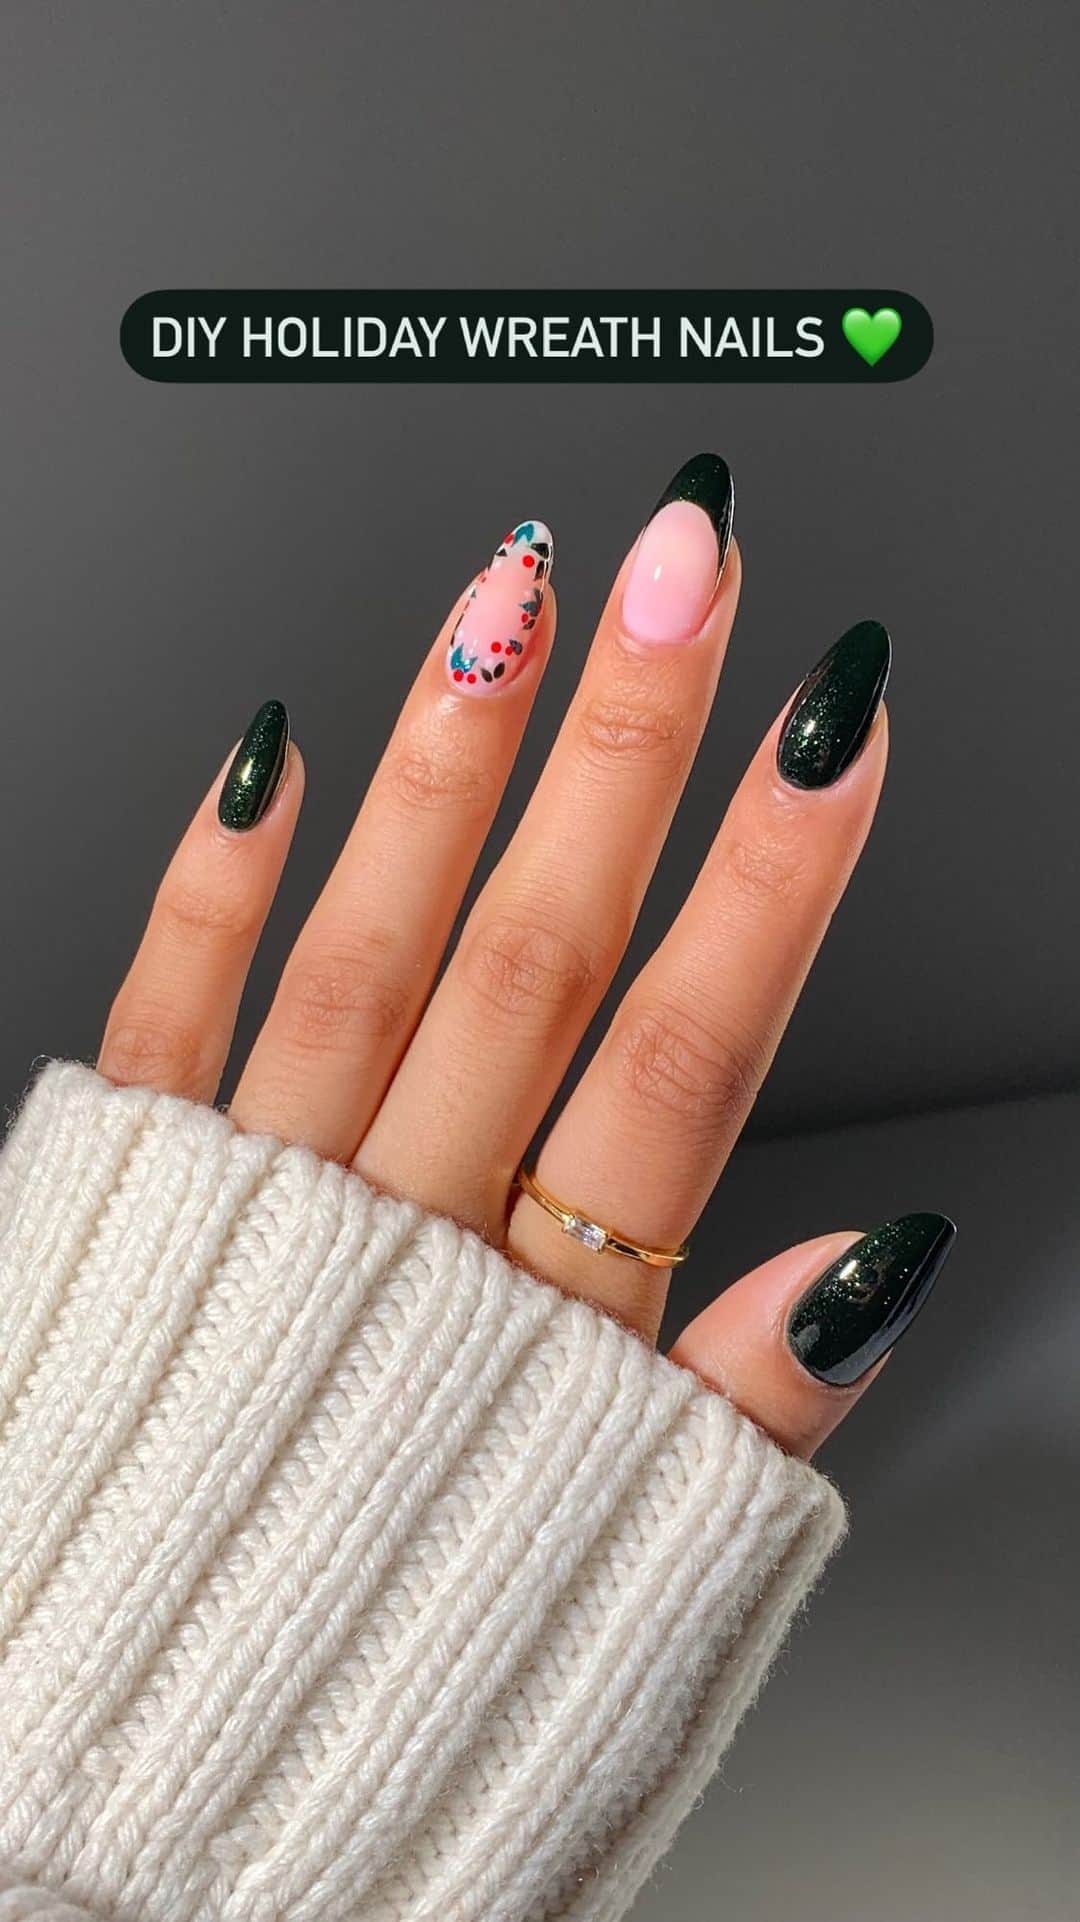 OPIのインスタグラム：「This wreath mani got us feelin’ pine. 🎄🤩  Spruce up your nails for the holidays with shades from our limited edition #OPITerriblyNice collection.   #OPI #OPIObsessed #HolidayNails #wreathnails」